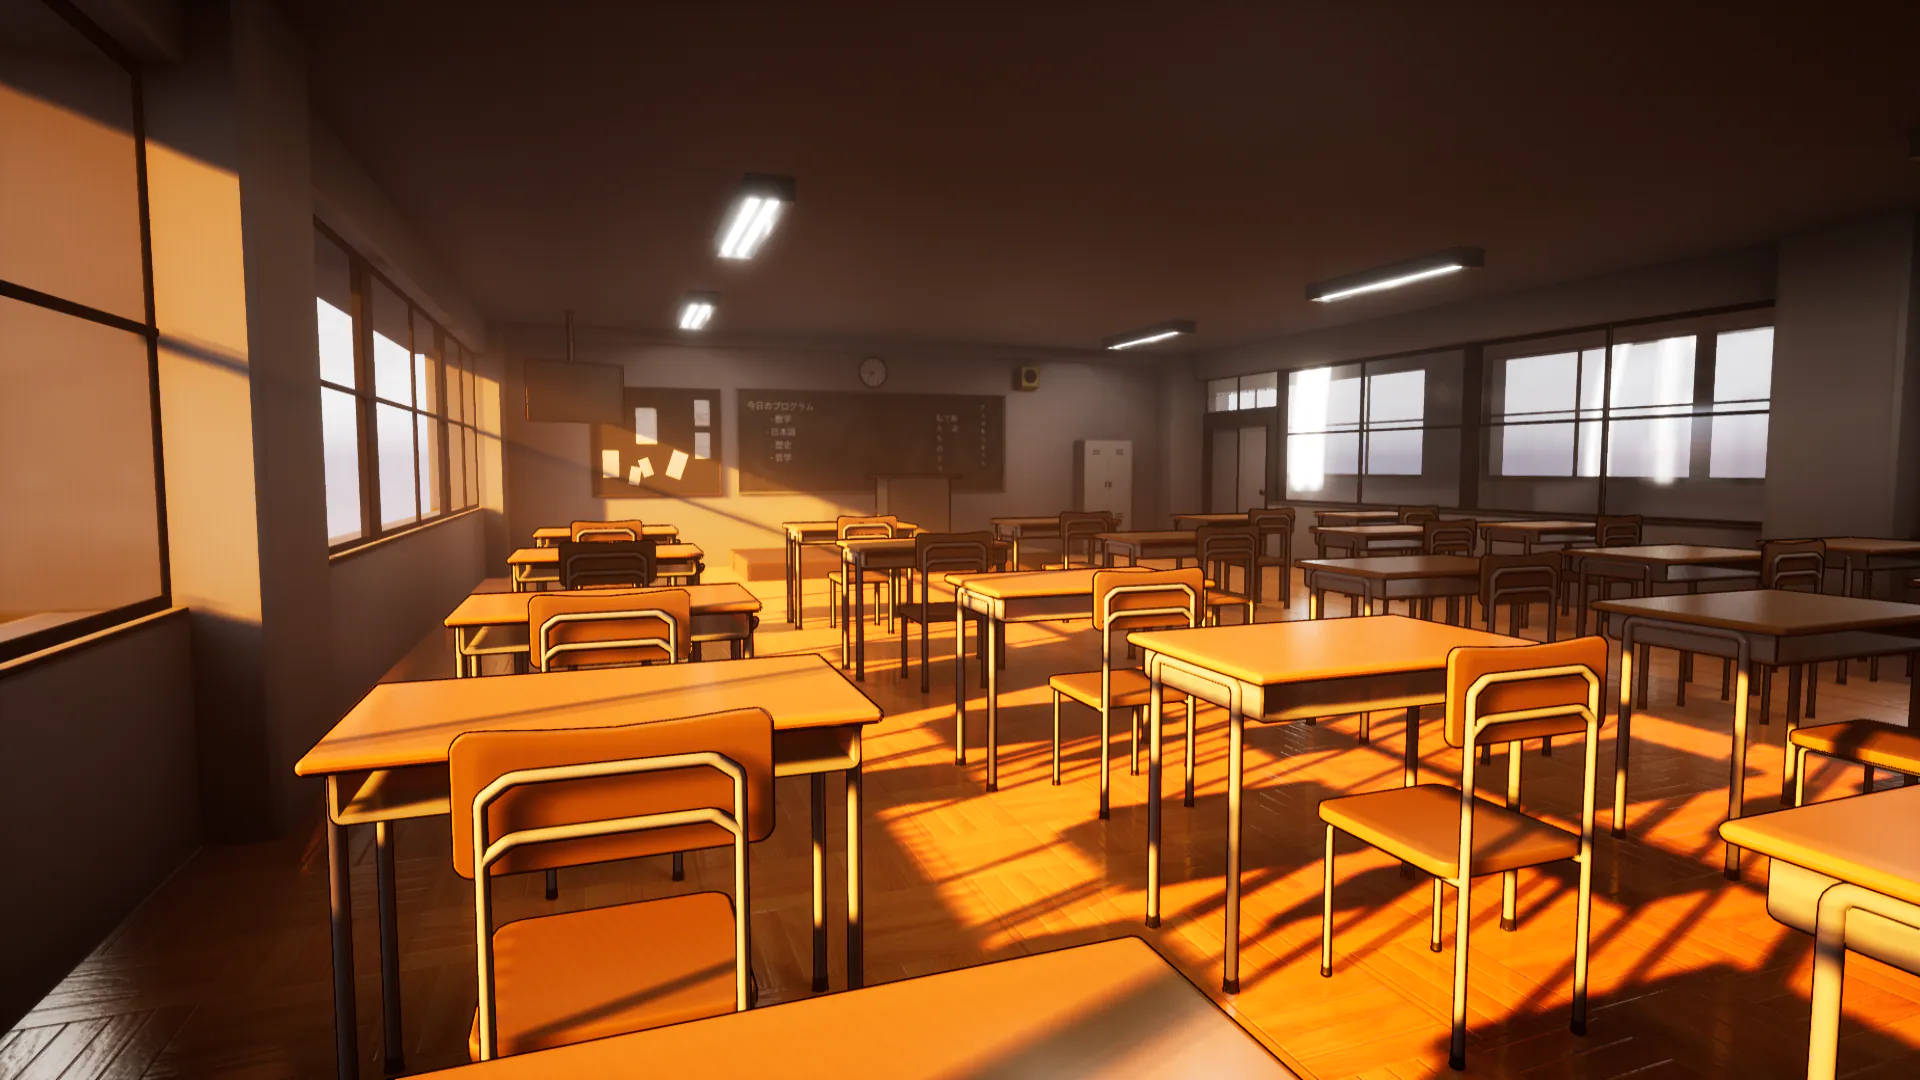 Graphic Art Classroom Bathed In Sunlight Background